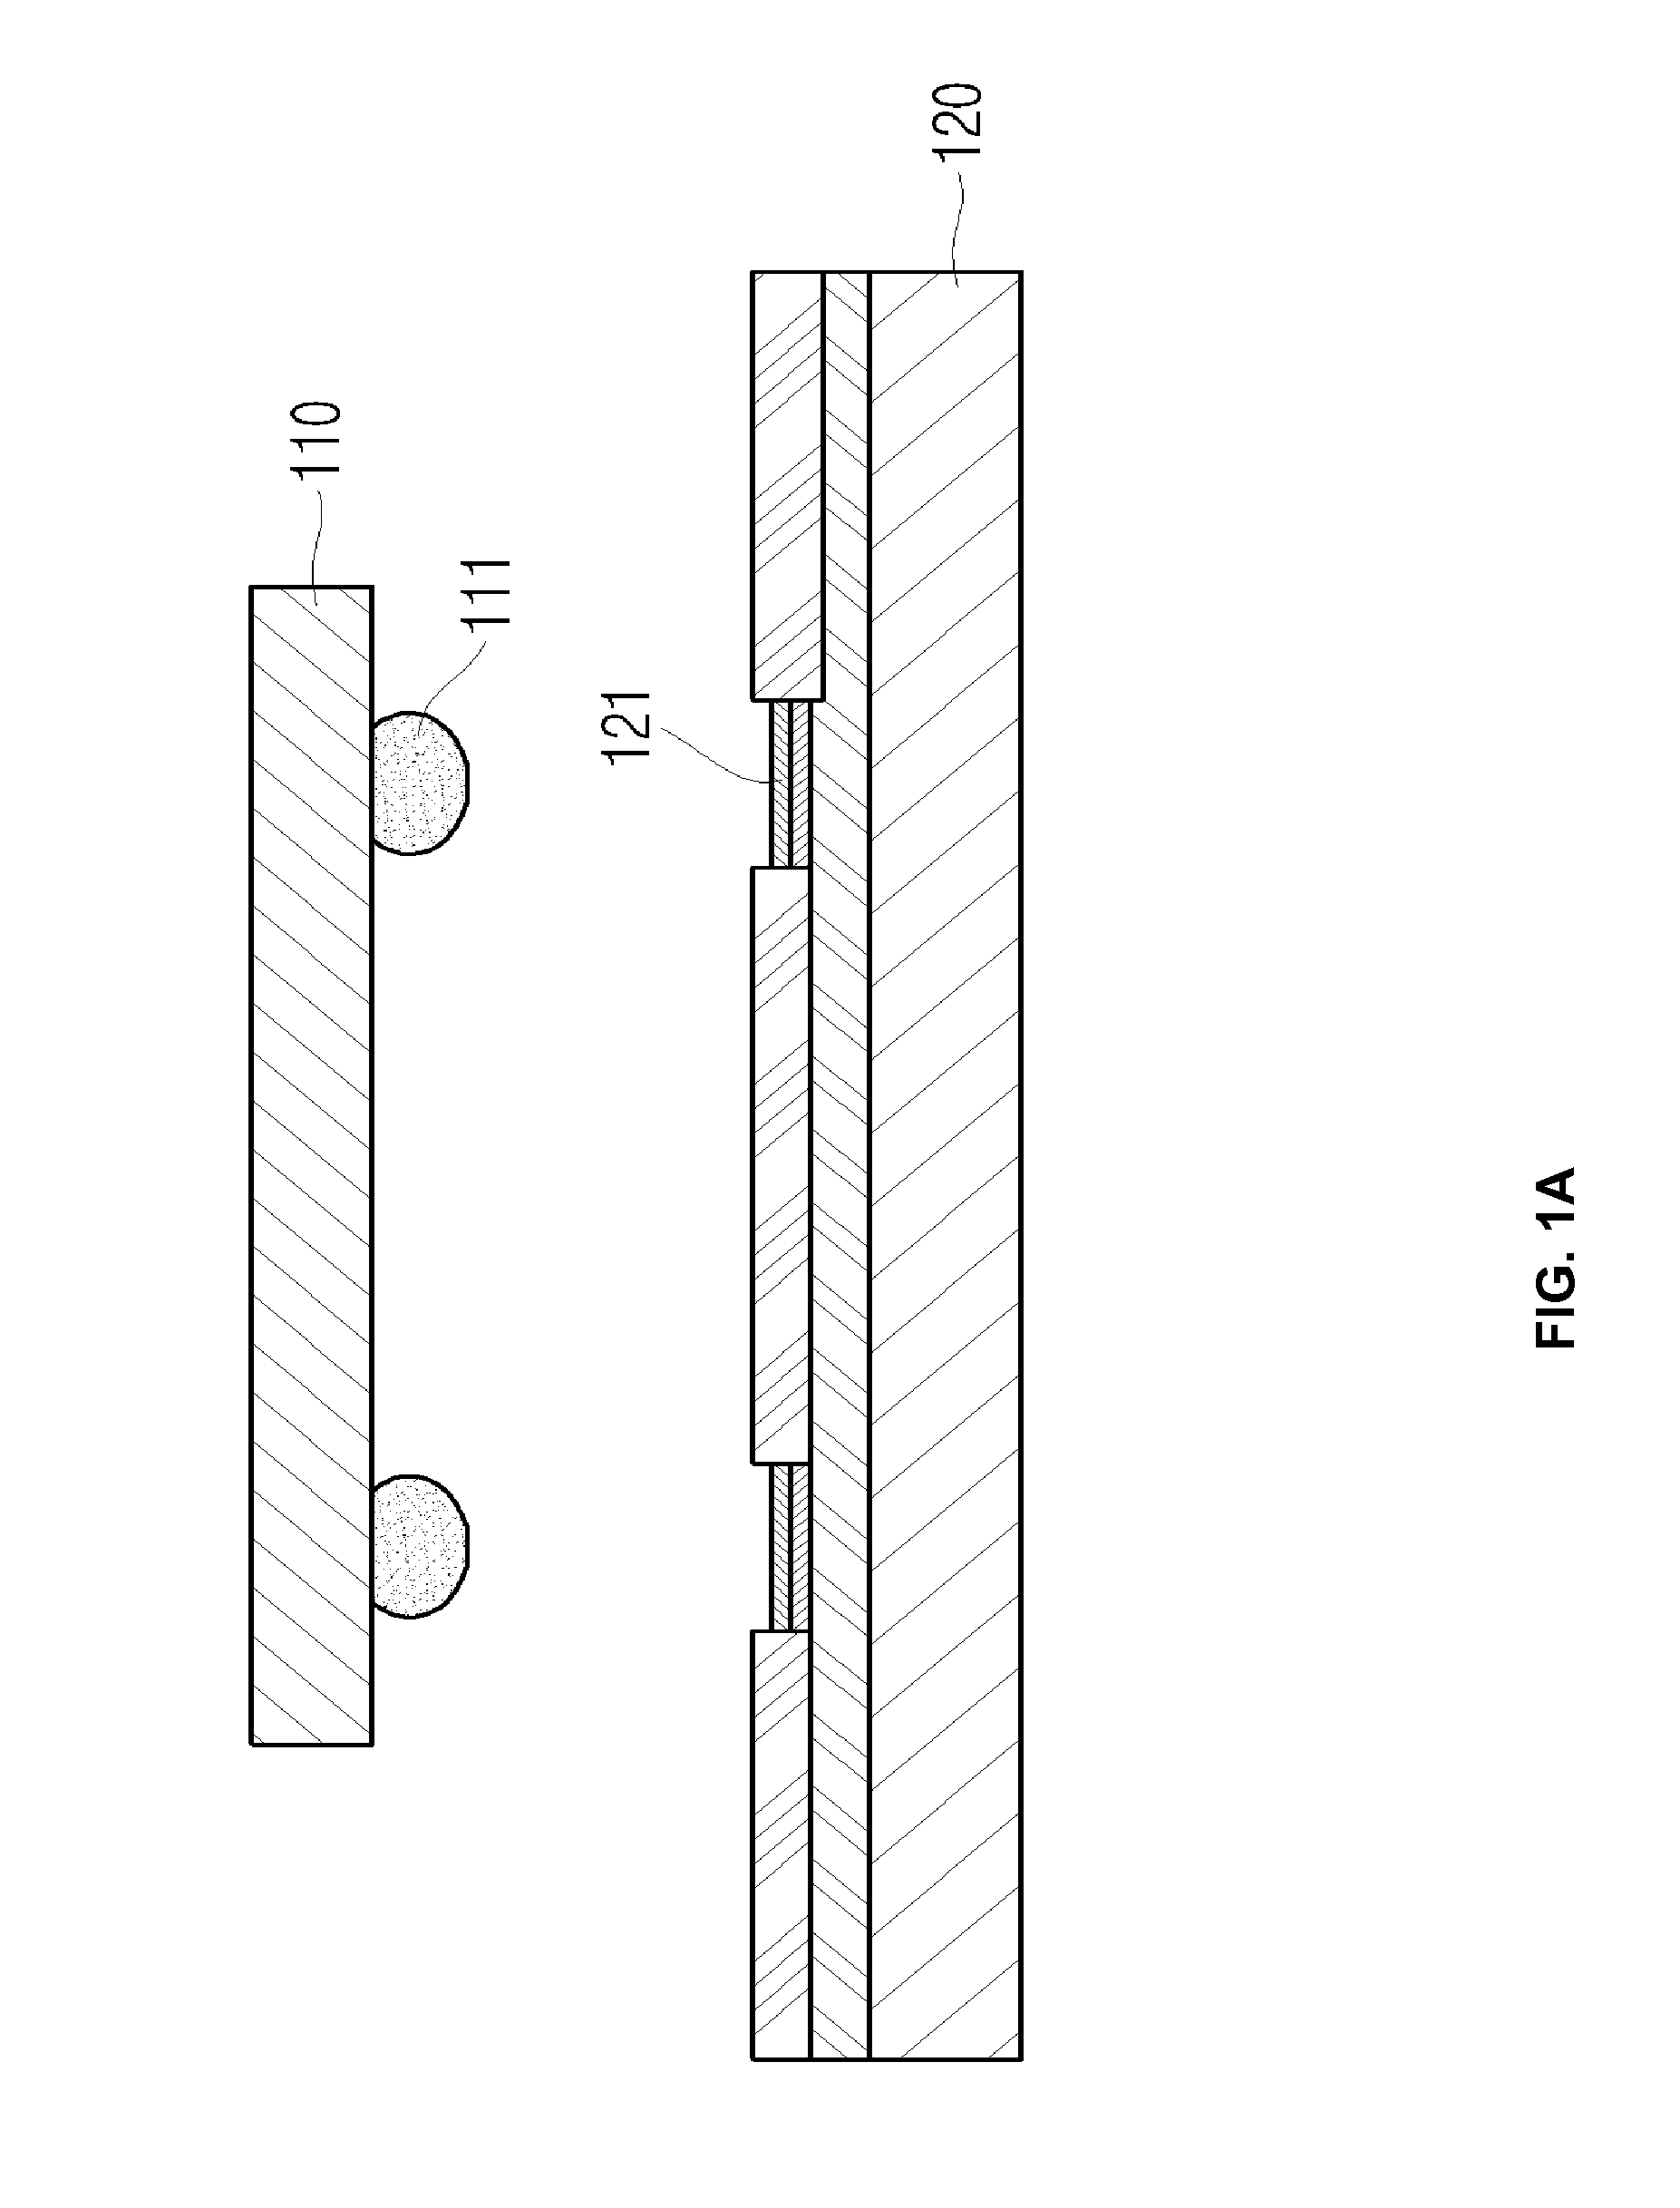 Laser assisted bonding for semiconductor die interconnections